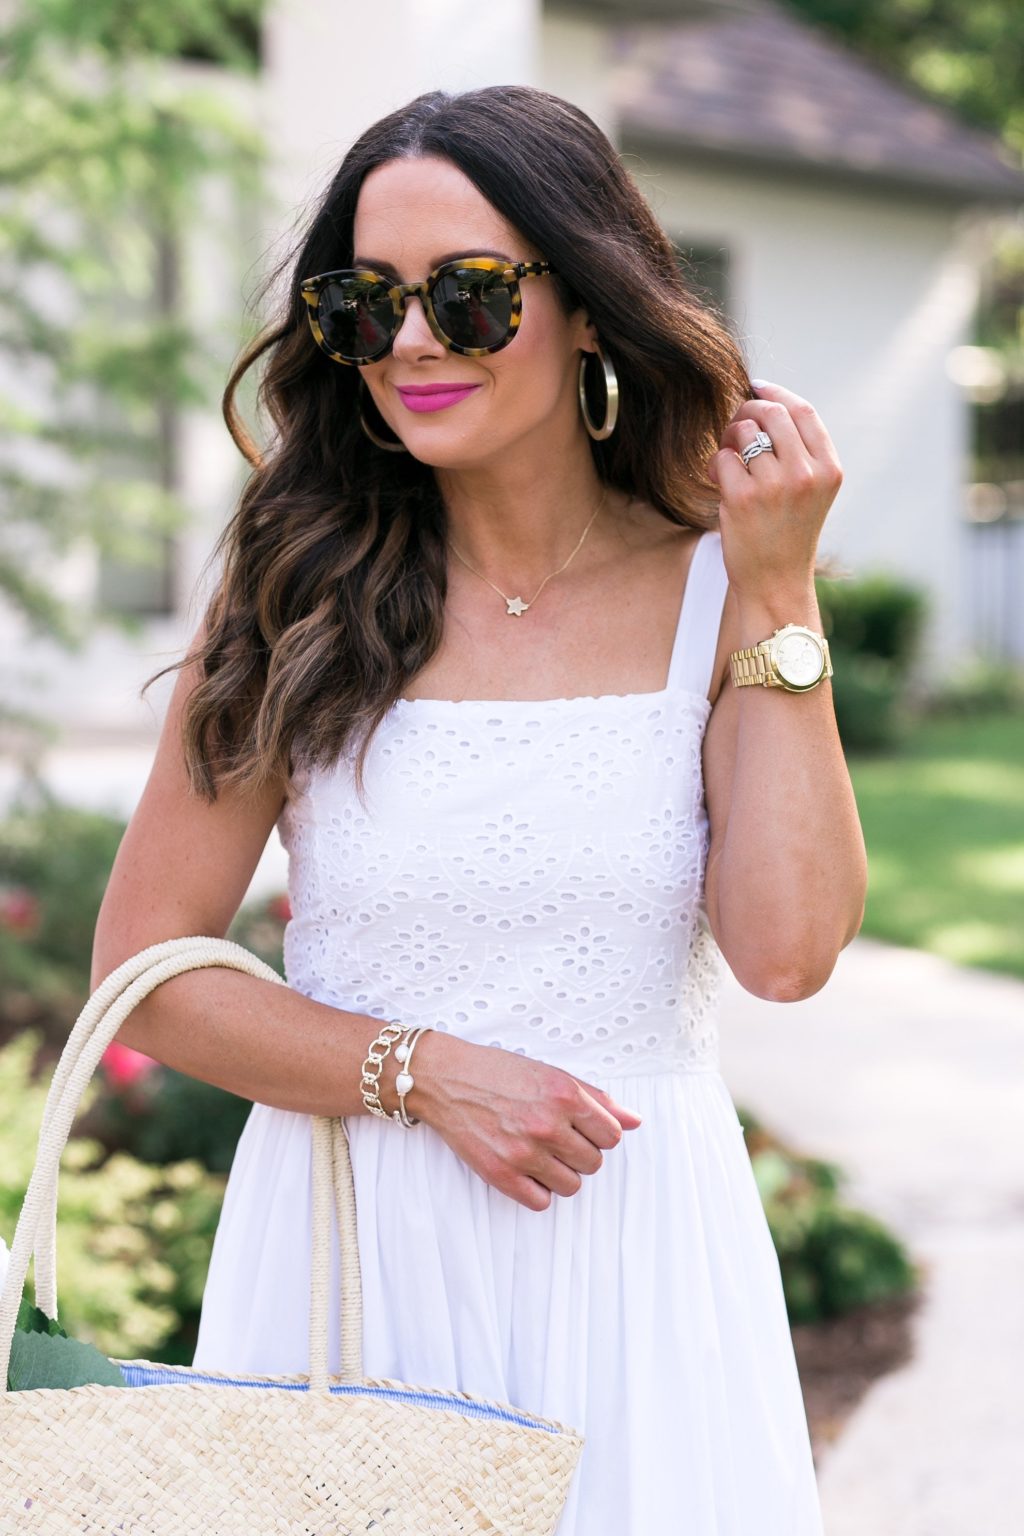 Kendra Scott Stars Collection - The Double Take Girls